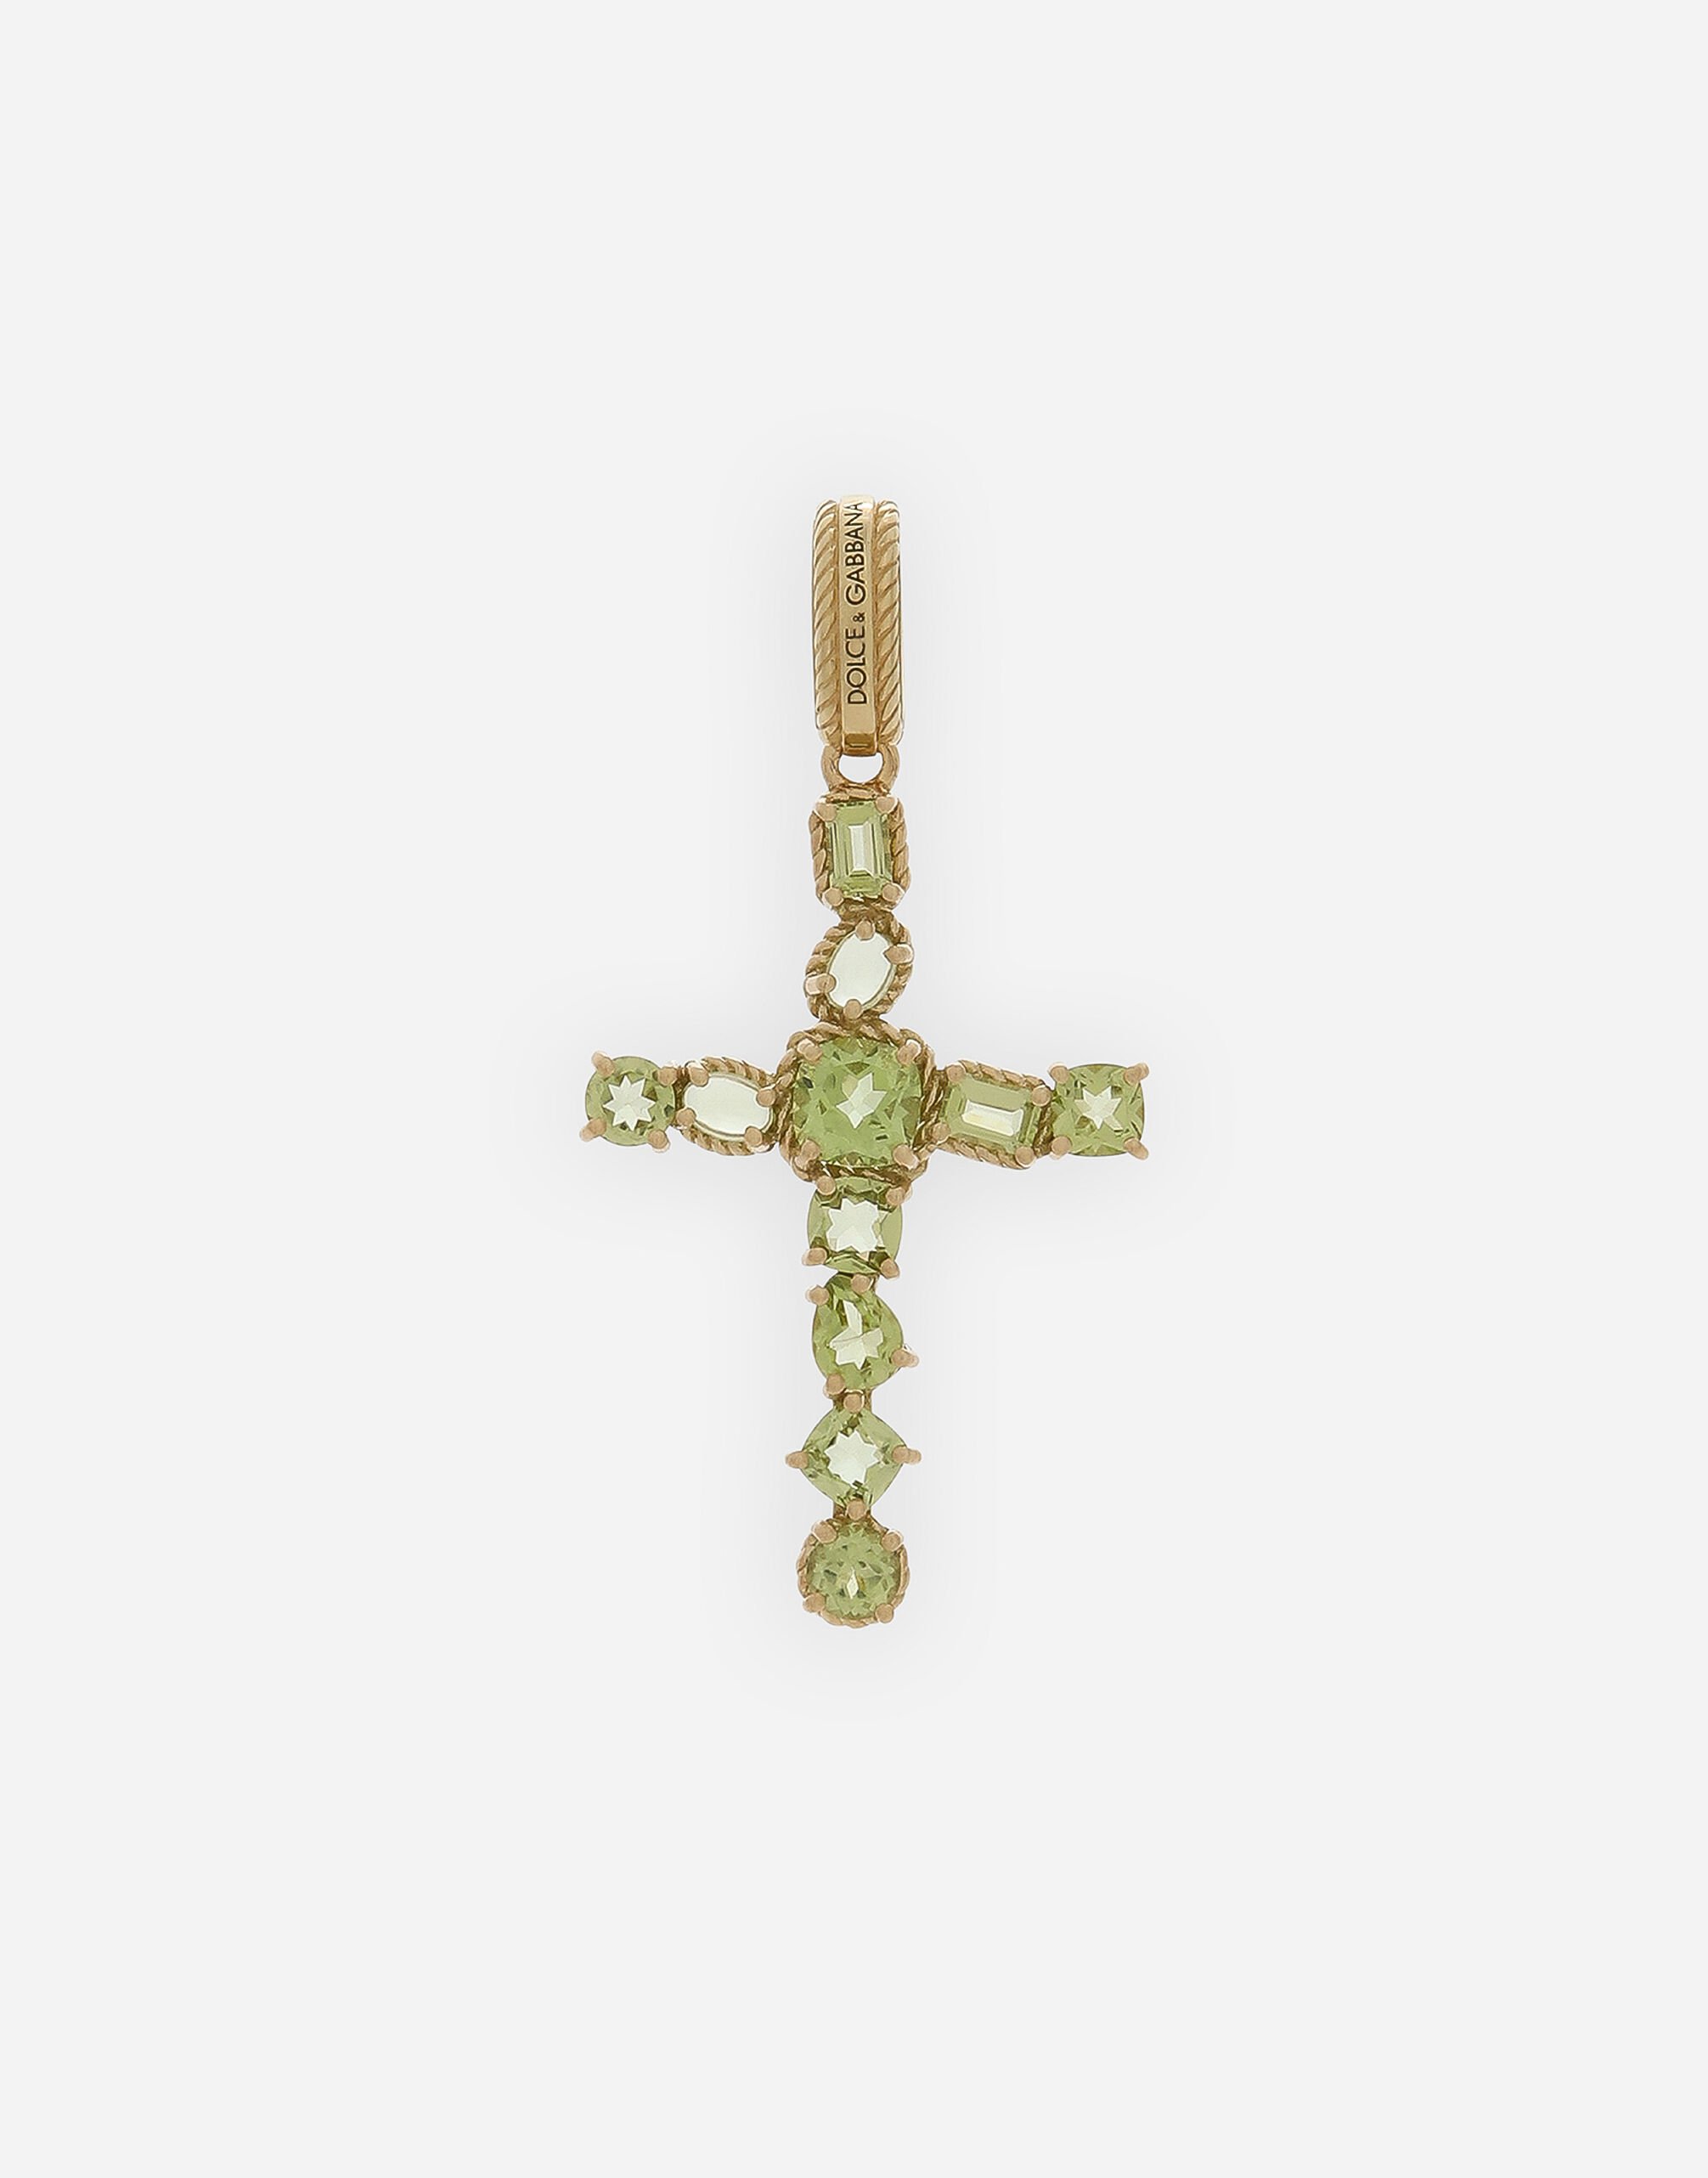 Dolce & Gabbana Anna Charm in yellow gold 18Kt and peridots Gold WANR1GWMIXQ